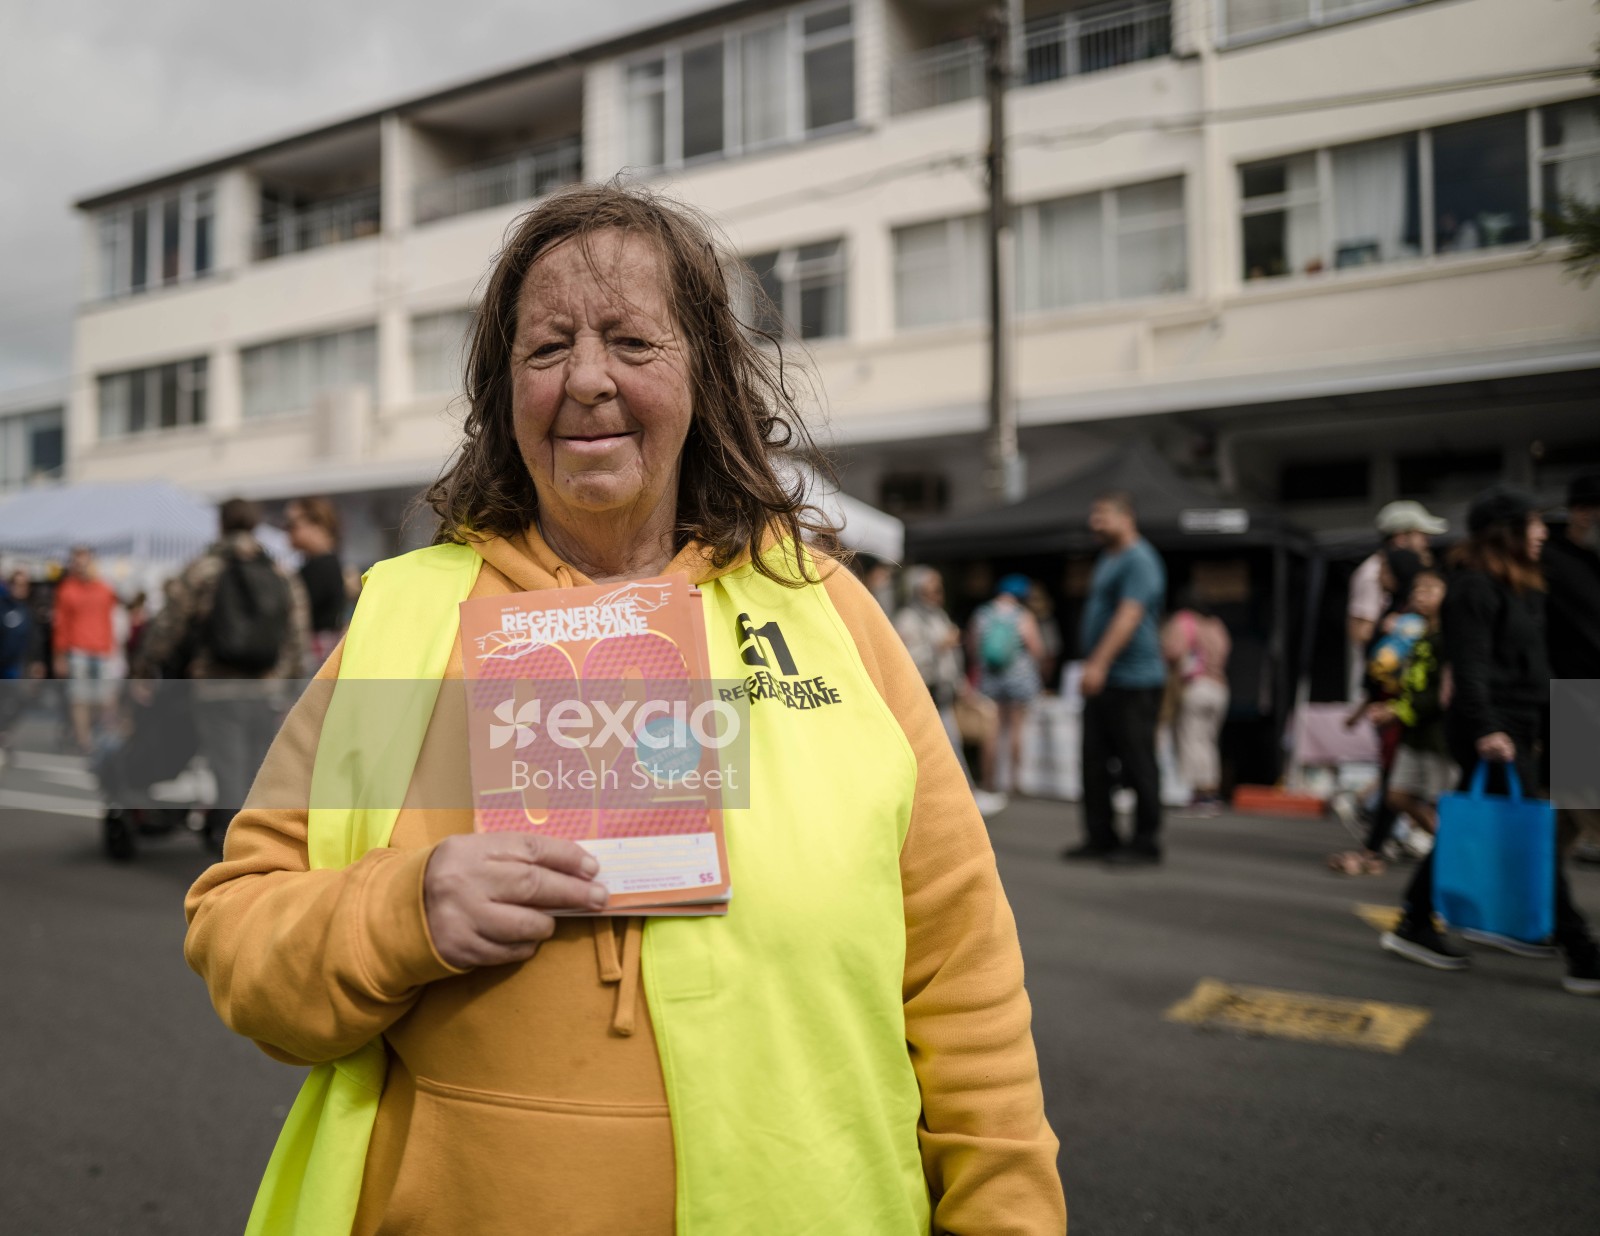 Woman wearing a yellow vest and orange hoodie holding a Regenerate magazine at Newtown festival 2021